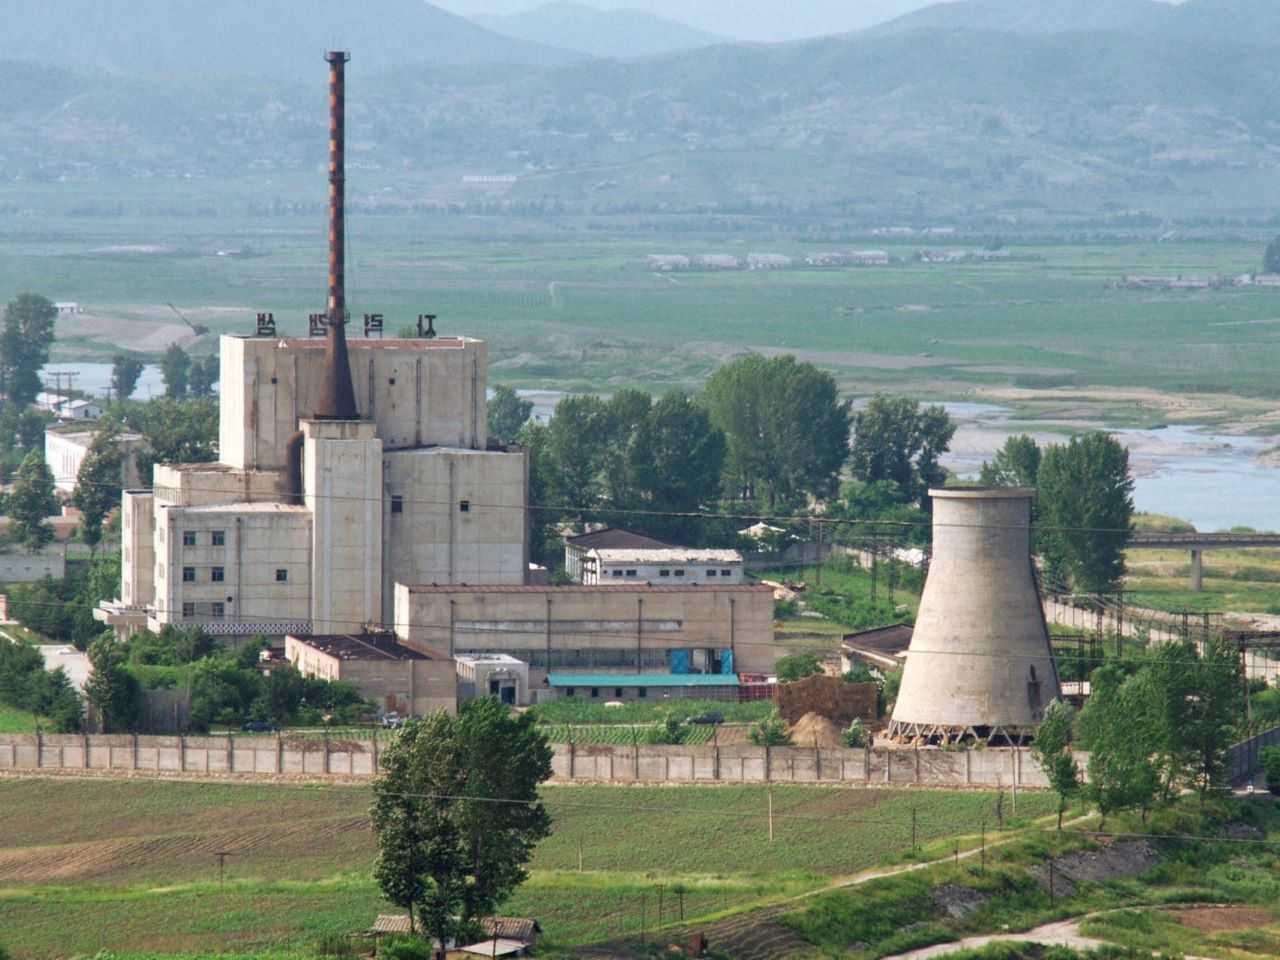 A North Korean nuclear plant is seen before demolishing a cooling tower in Yongbyon, in this photo taken June 27, 2008 and released by Kyodo. Photo: Reuters